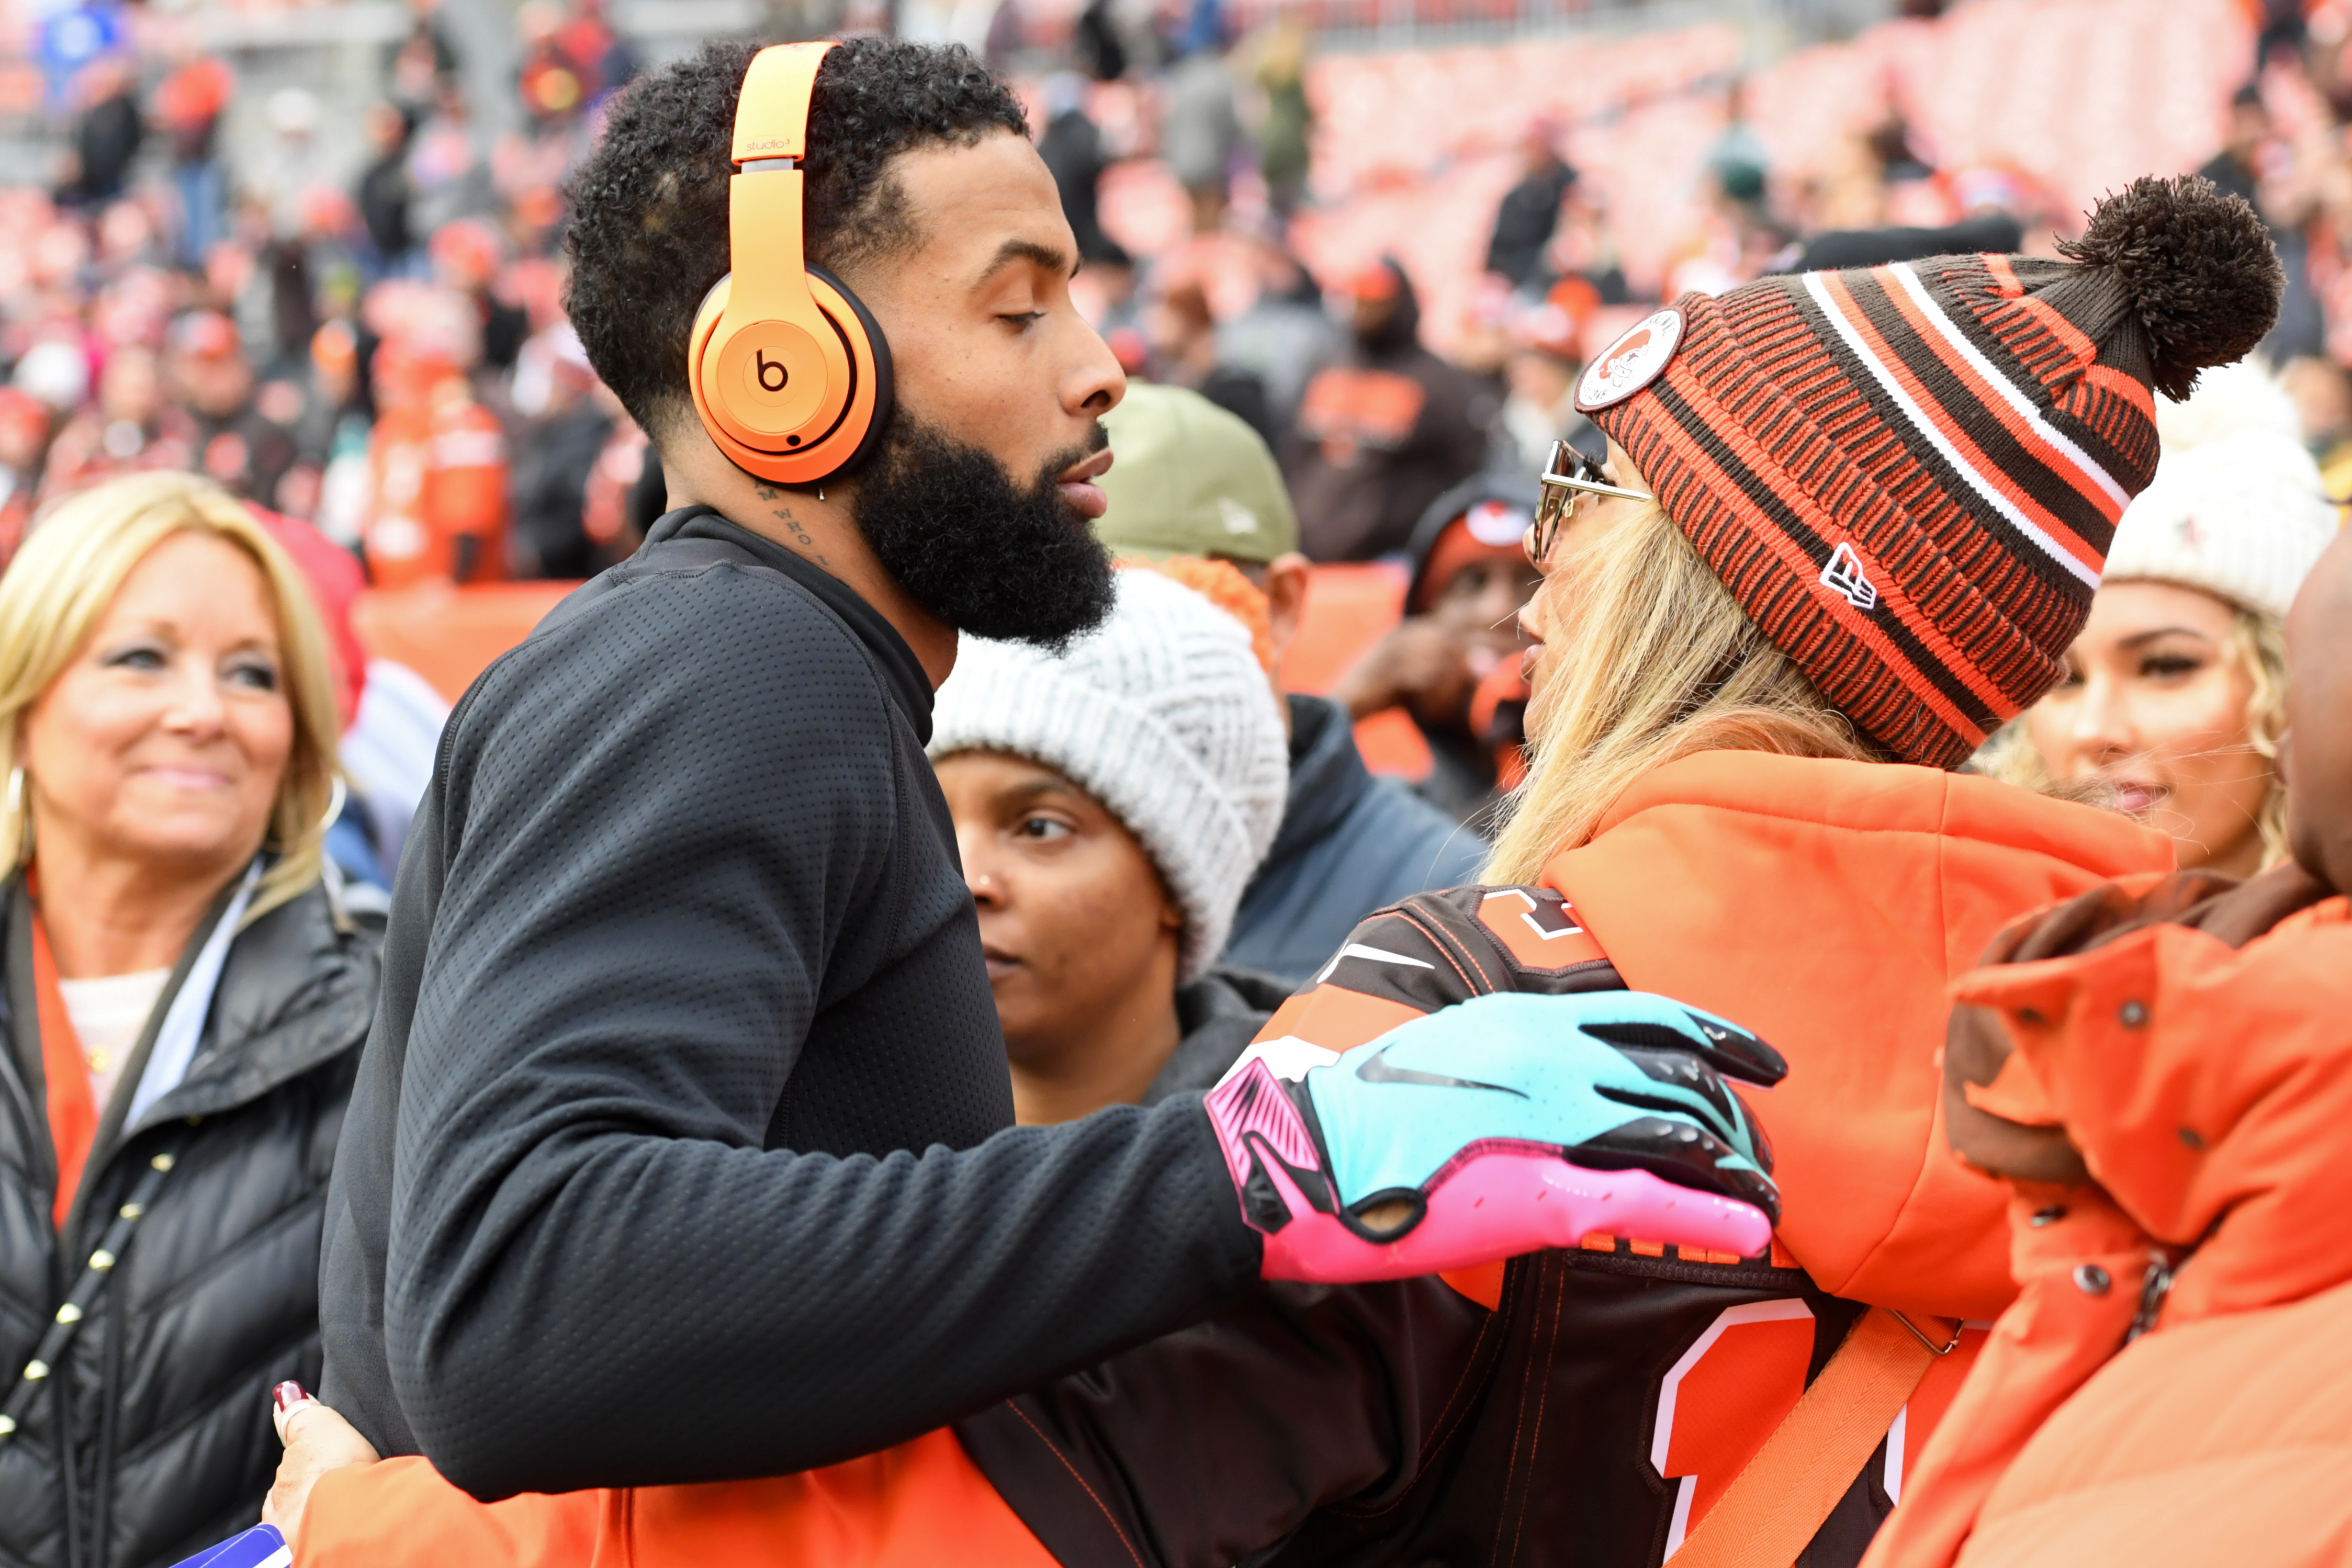 Odell Beckham Jr. hugs Heather Van Norman, prior to a game against the Miami Dolphins on November 24, 2019, in Cleveland, Ohio. | Source: Getty Images